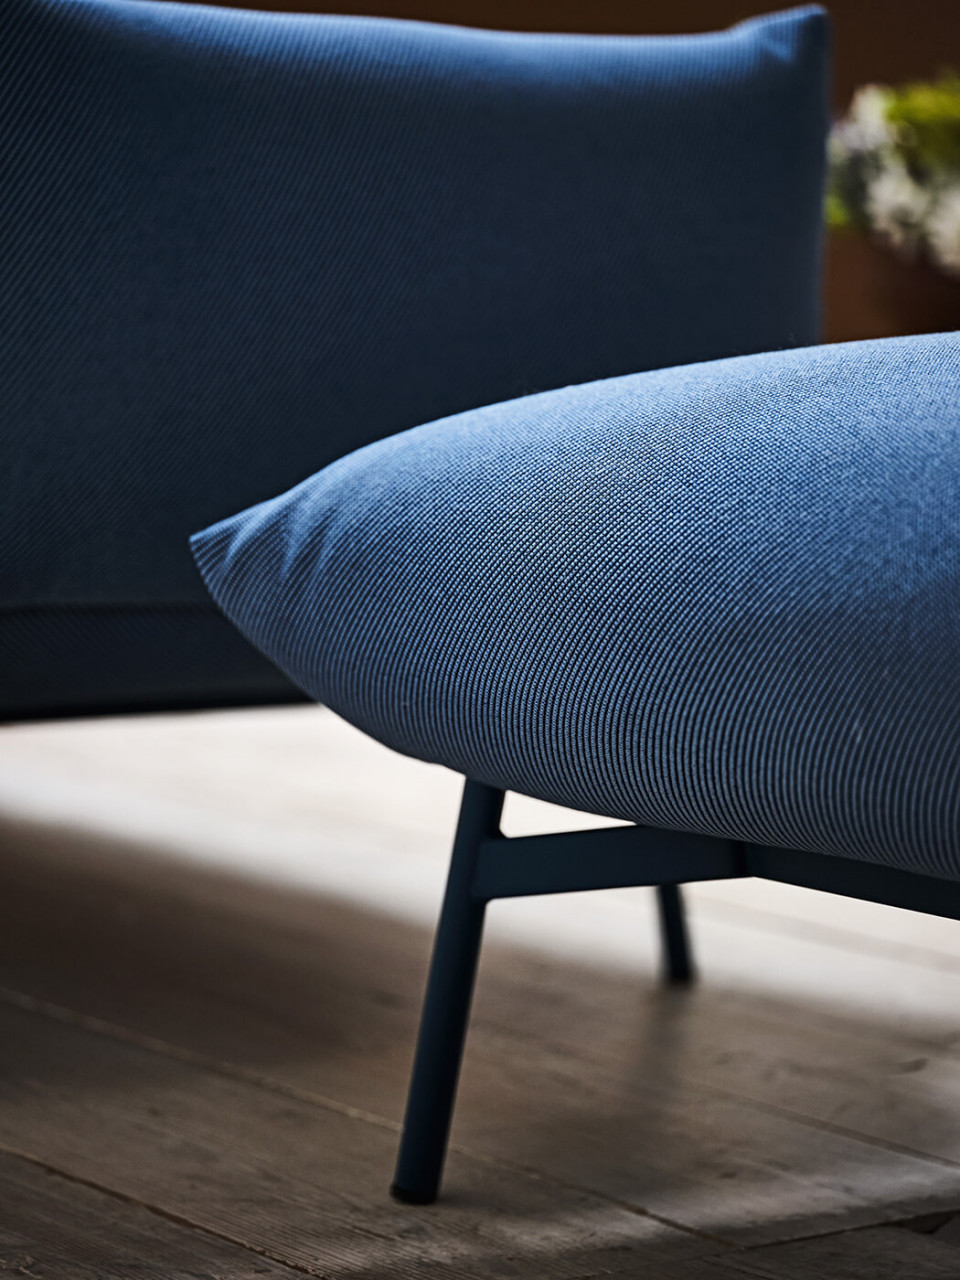 Area pouf with blue fabric